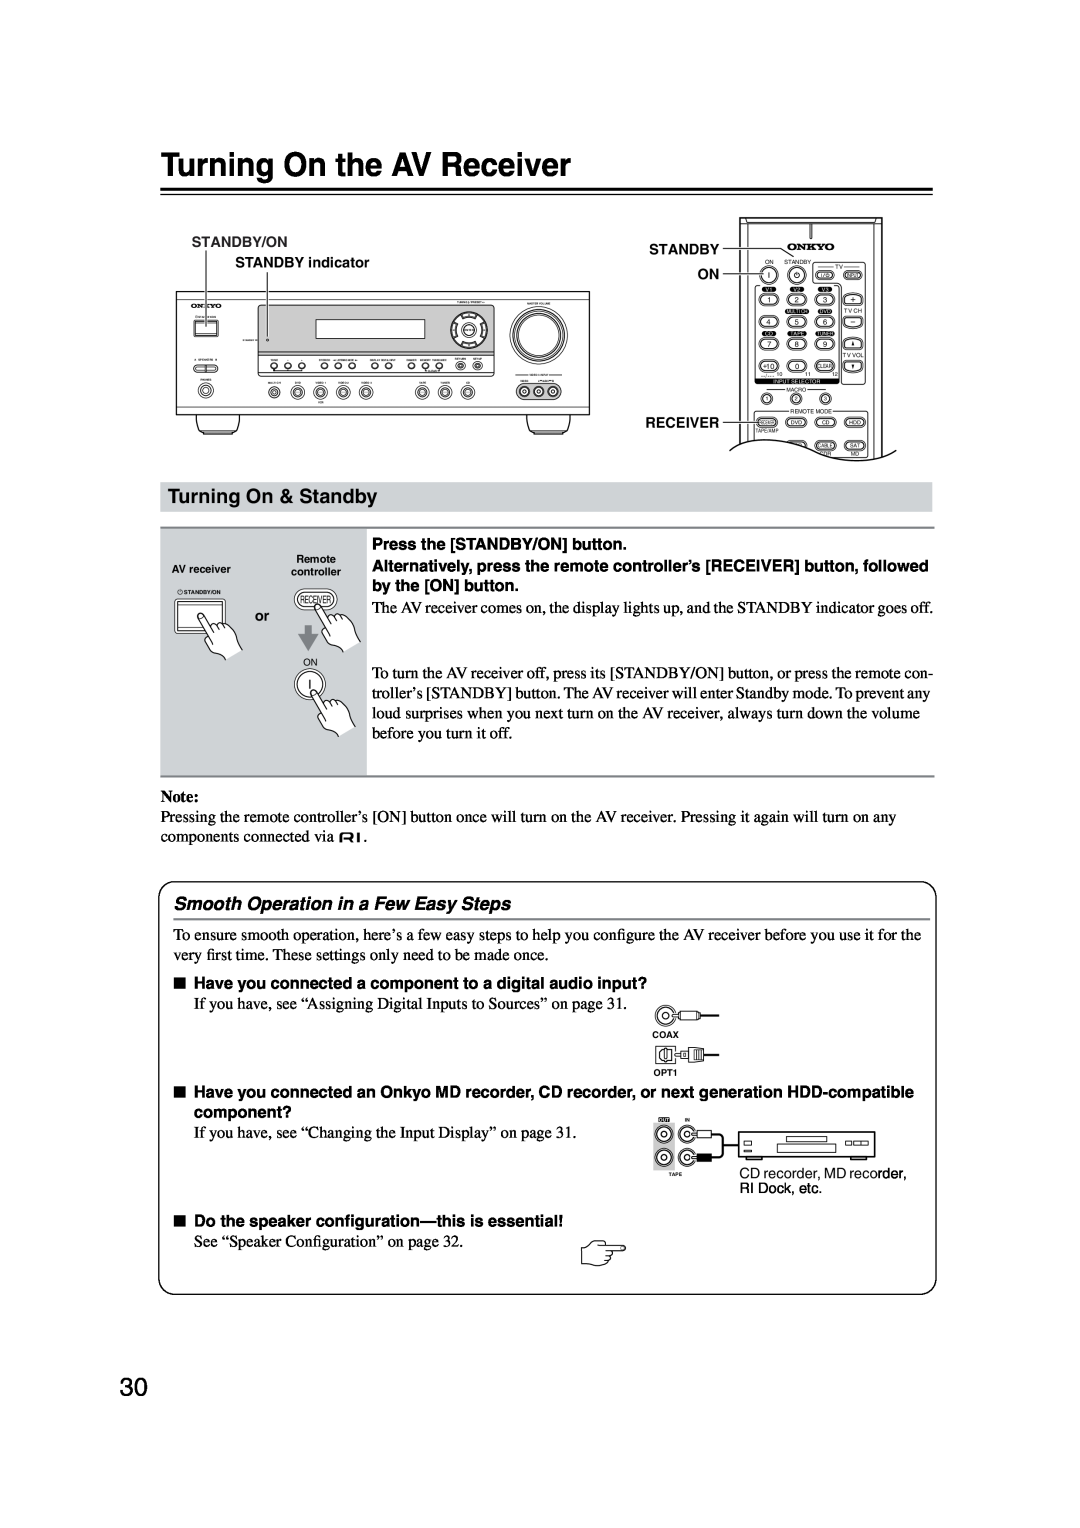 Onkyo TX-SR573 instruction manual Turning On & Standby, Smooth Operation in a Few Easy Steps, Turning On the AV Receiver 